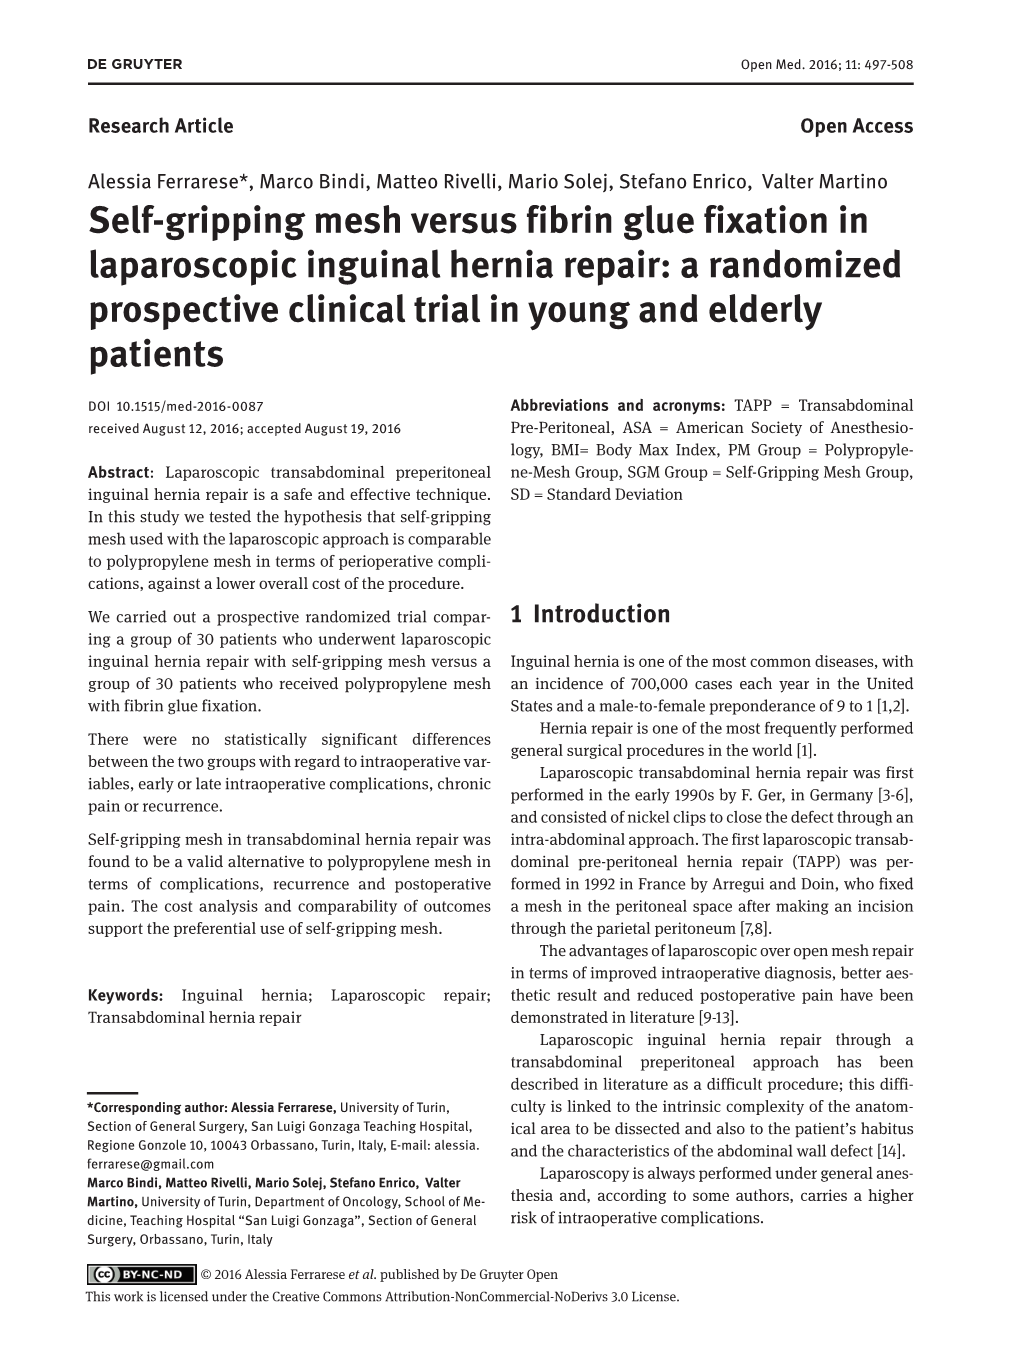 Self-Gripping Mesh Versus Fibrin Glue Fixation in Laparoscopic Inguinal Hernia Repair: a Randomized Prospective Clinical Trial in Young and Elderly Patients